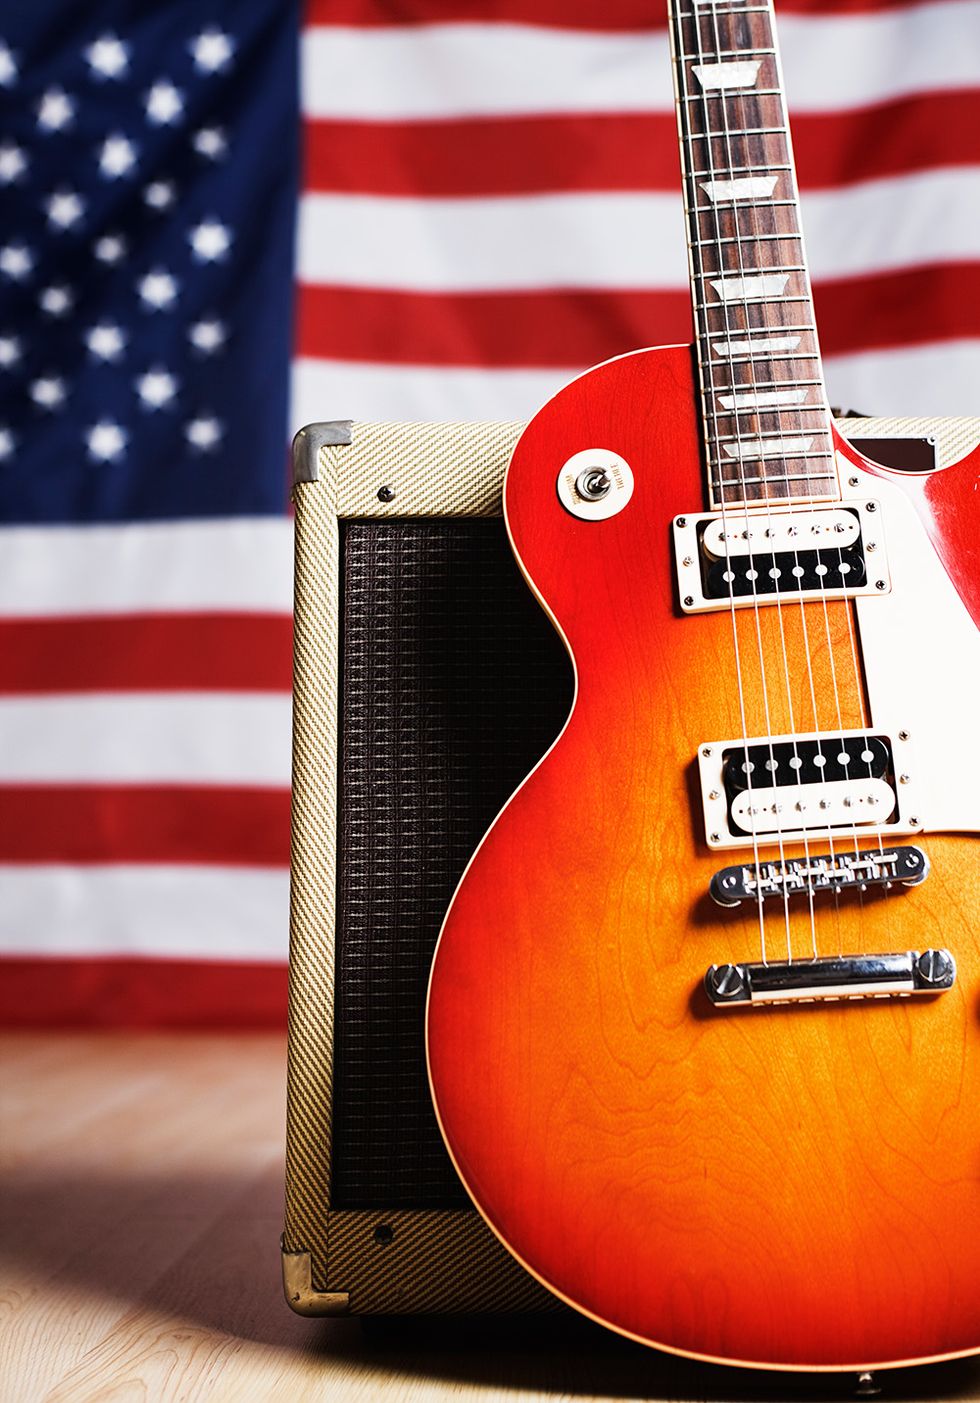 4th of july activities patriotic country songs